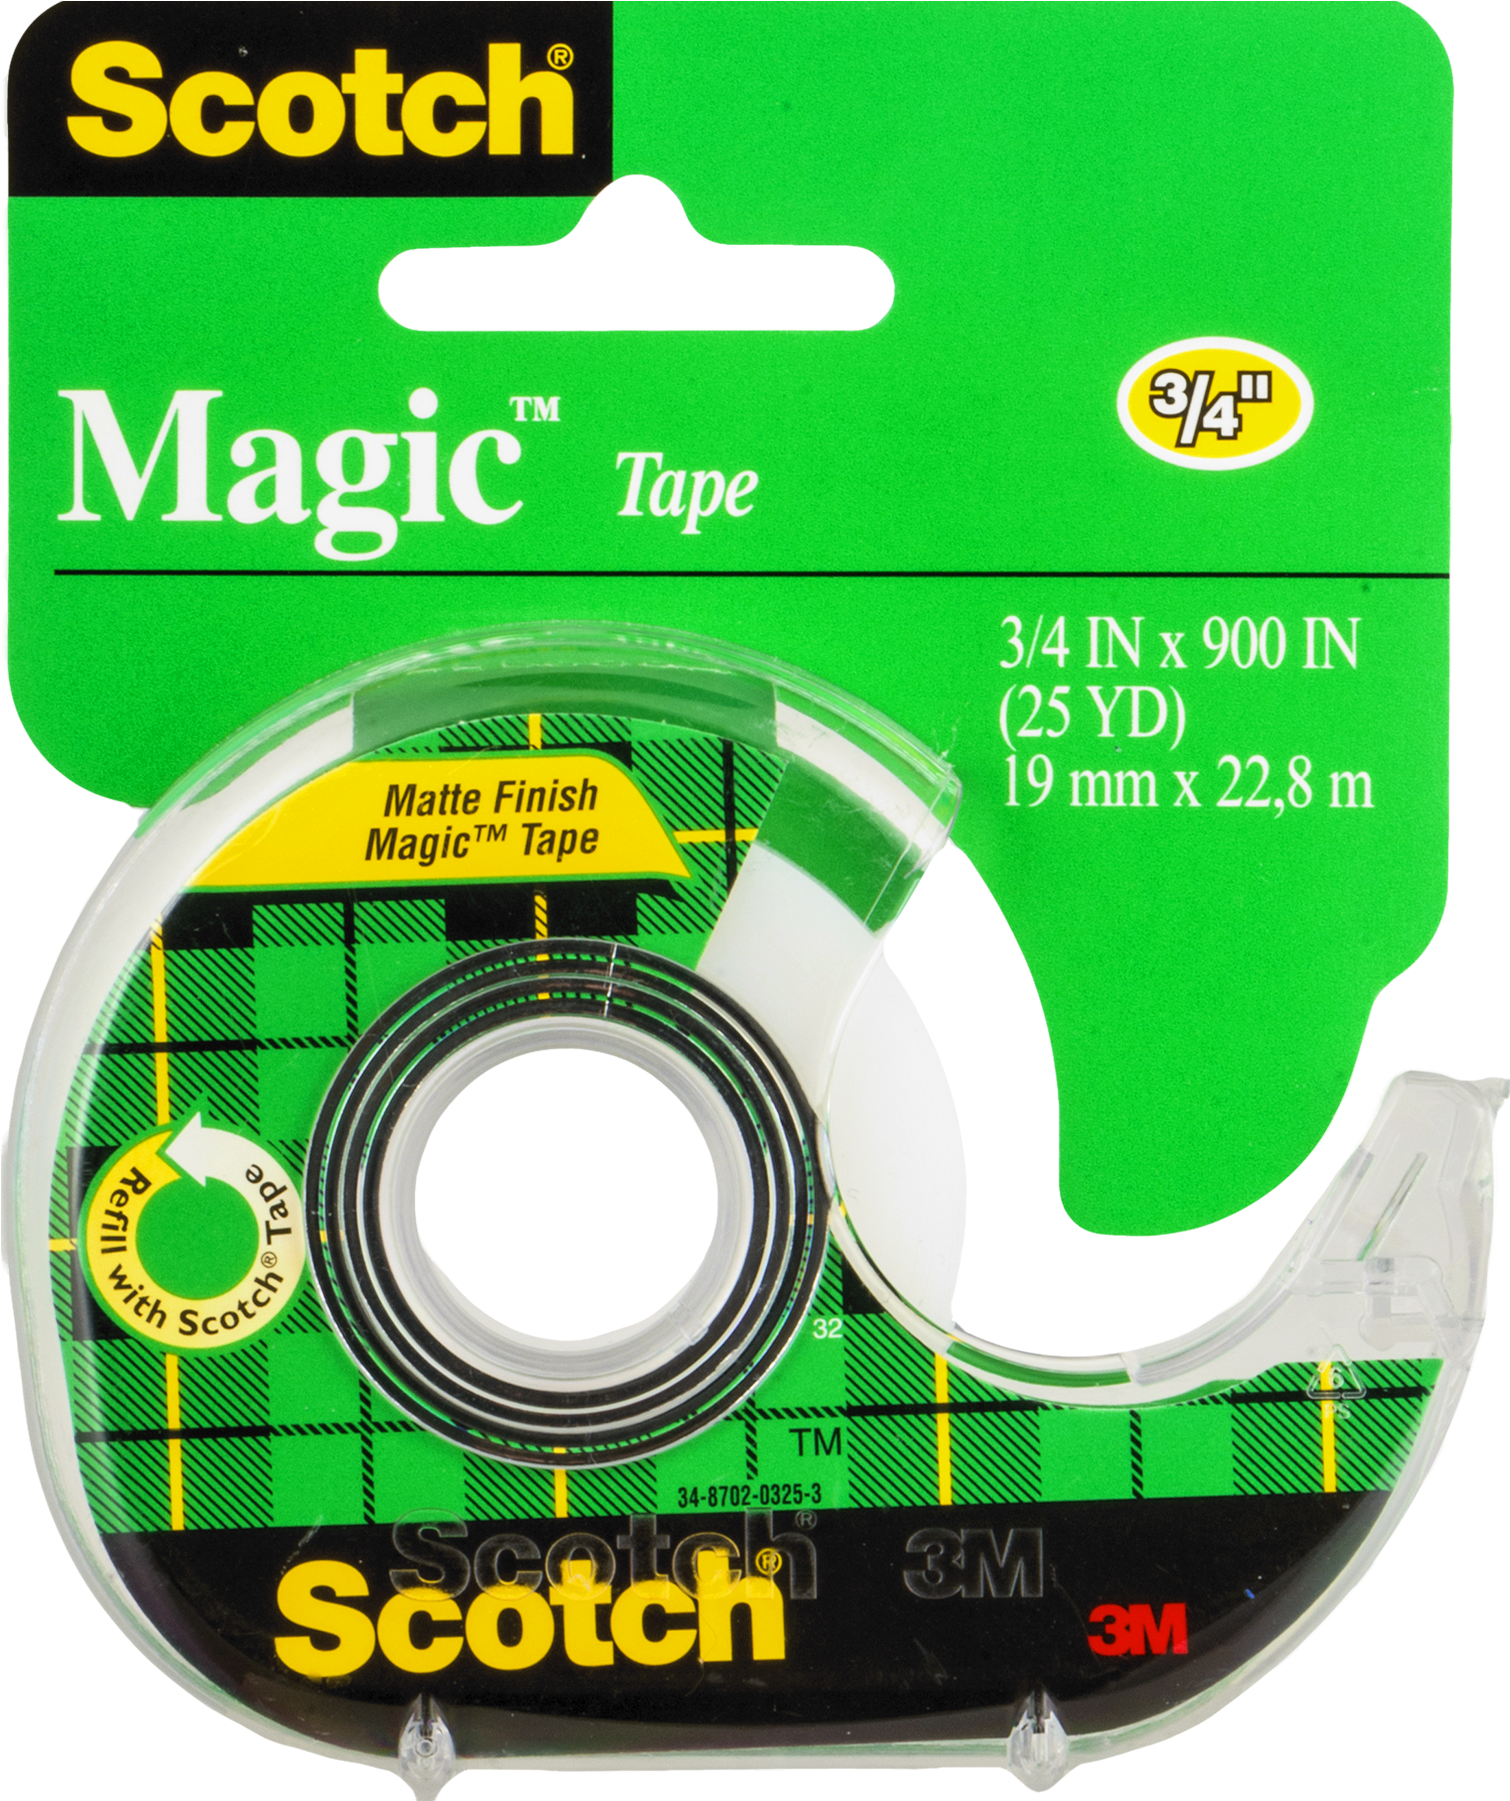 A Tape In A Green Package